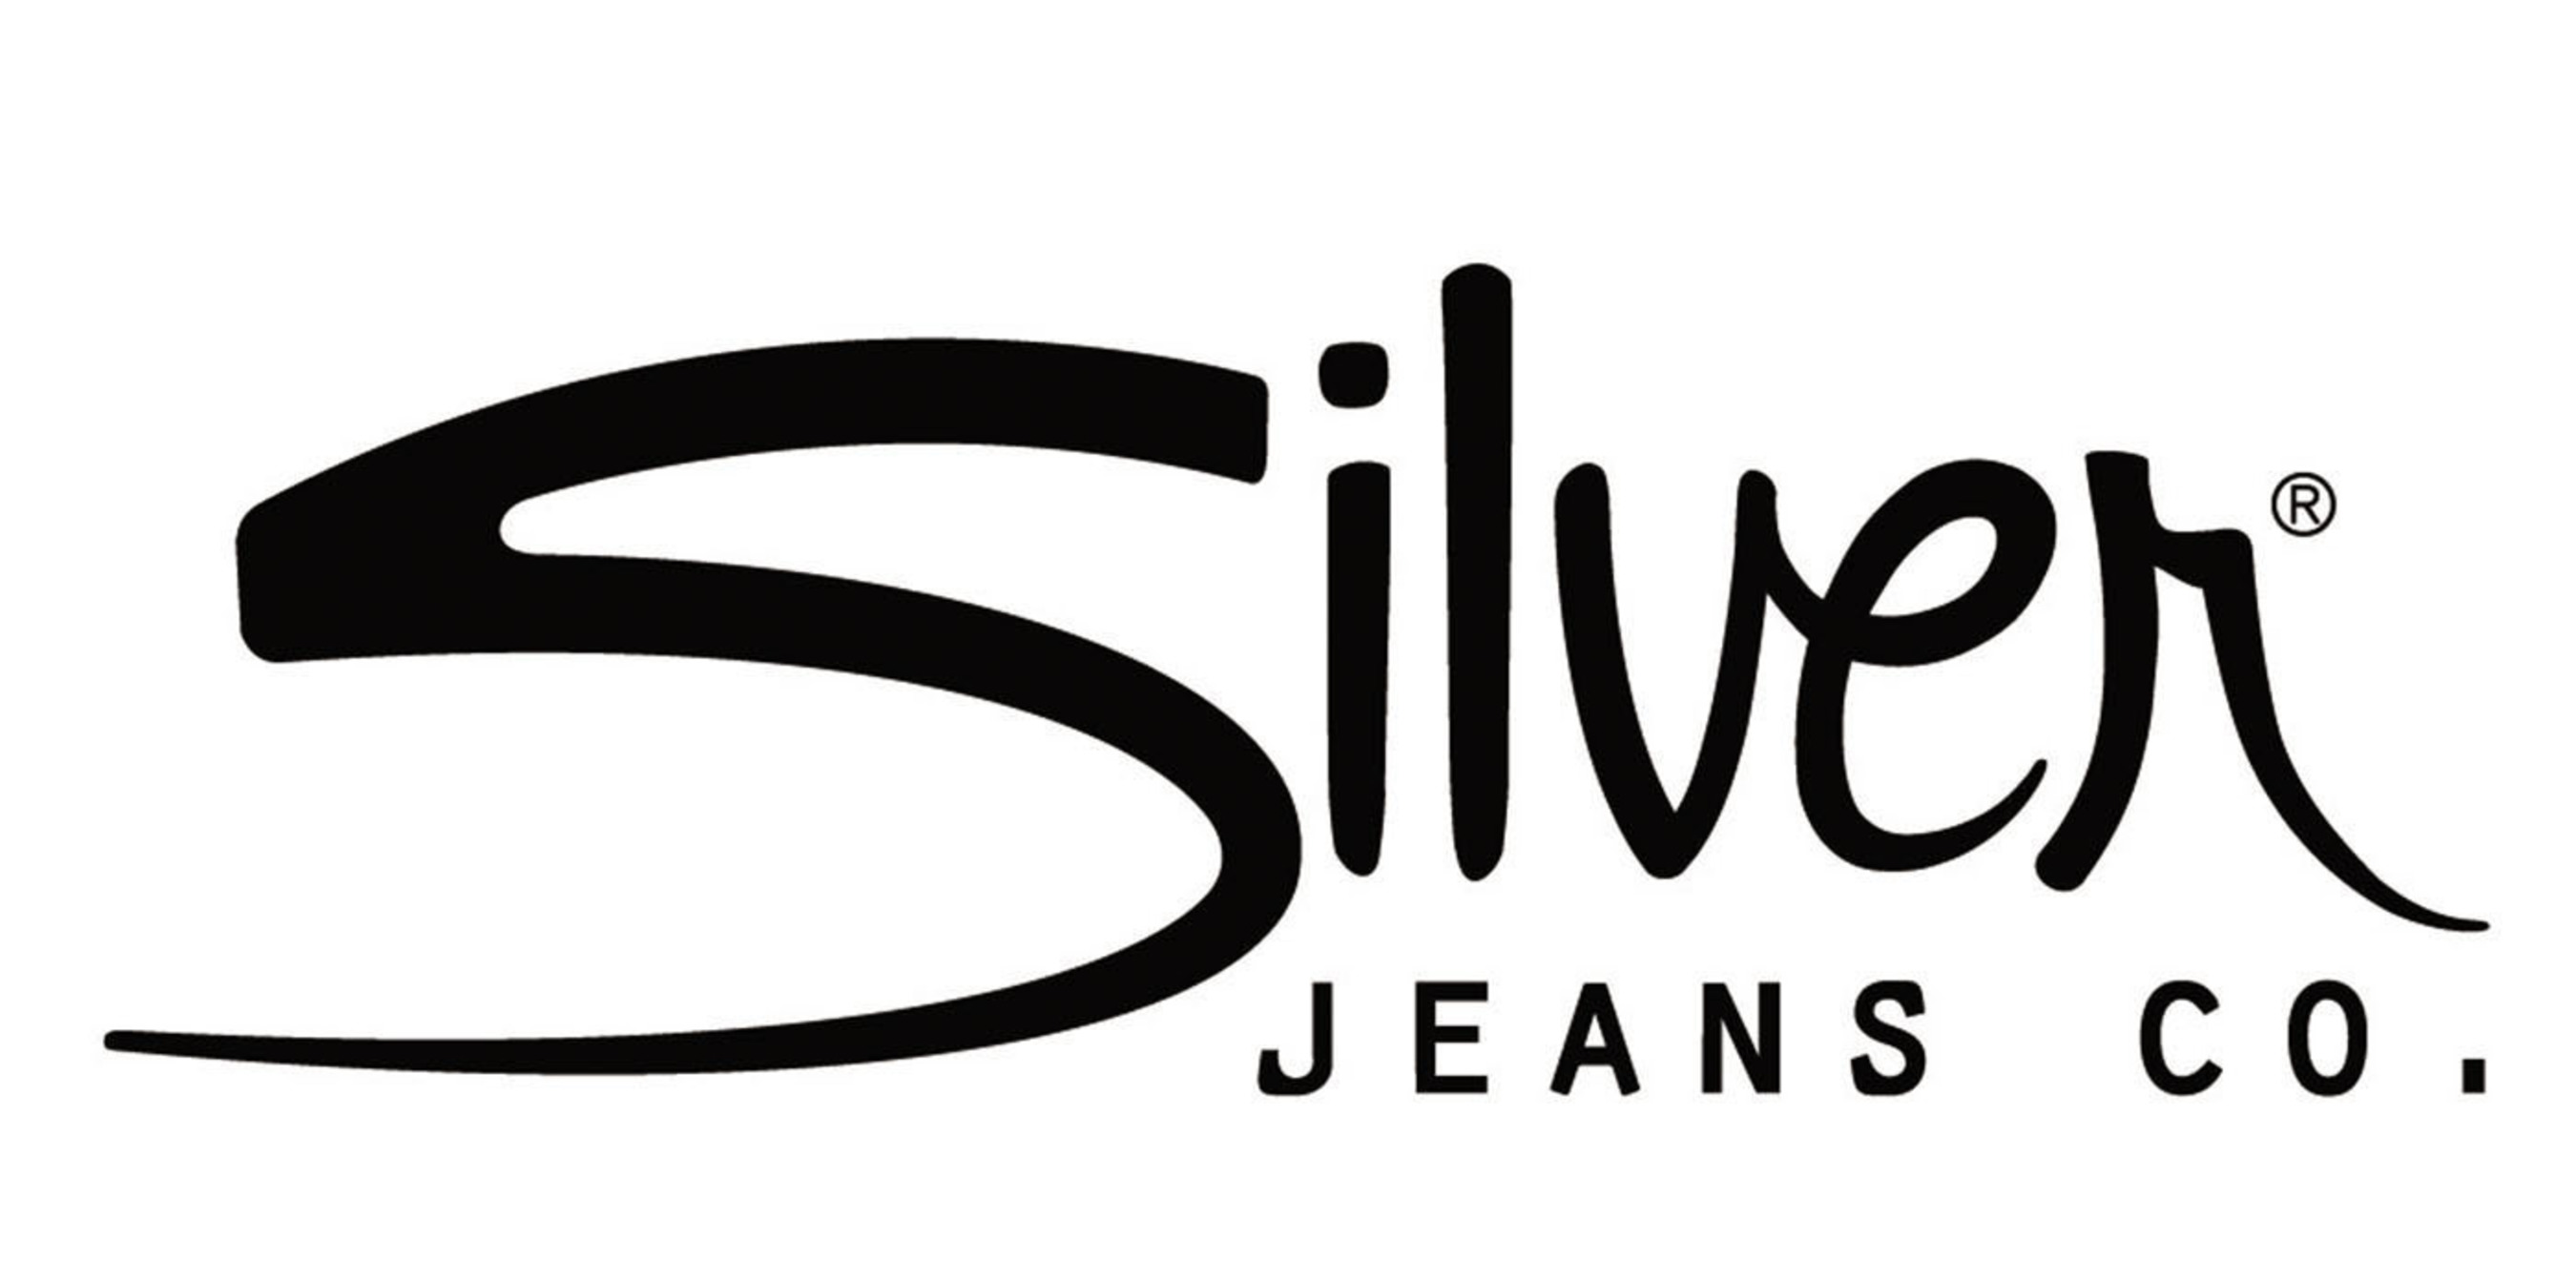 Silver Jeans Co.™ Set To Open 'Loft' At Mall of America®